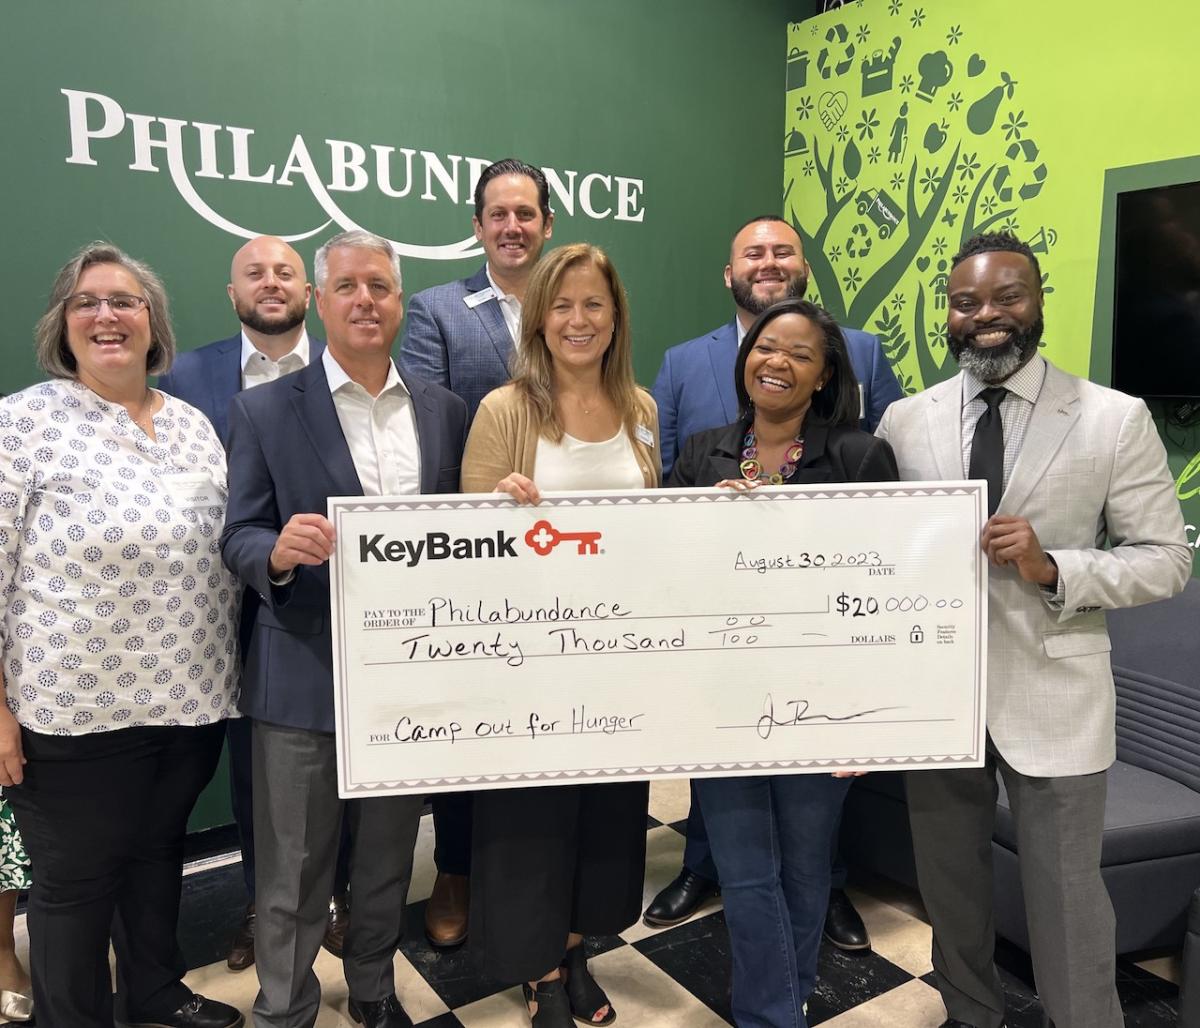 KeyBank presents a check in the amount of $20,000 to Philabundance Inc. From left to right: From left to right: Julie Vetack, Key@Work Relationship Manager, KeyBank; Robert Lombardo, Area Retail Leader, KeyBank; Jamie Tranfalia, Market President, KeyBank; Scott Fremont, Director of Individual Giving, Philabundance; Kristine DelMonte, Chief Development Officer, Philabundance; Juan Hurtado, Branch Manager, KeyBank; Loree D. Jones Brown, CEO Philabundance and Chiwuike Owunwanne, Corporate Responsibility Office